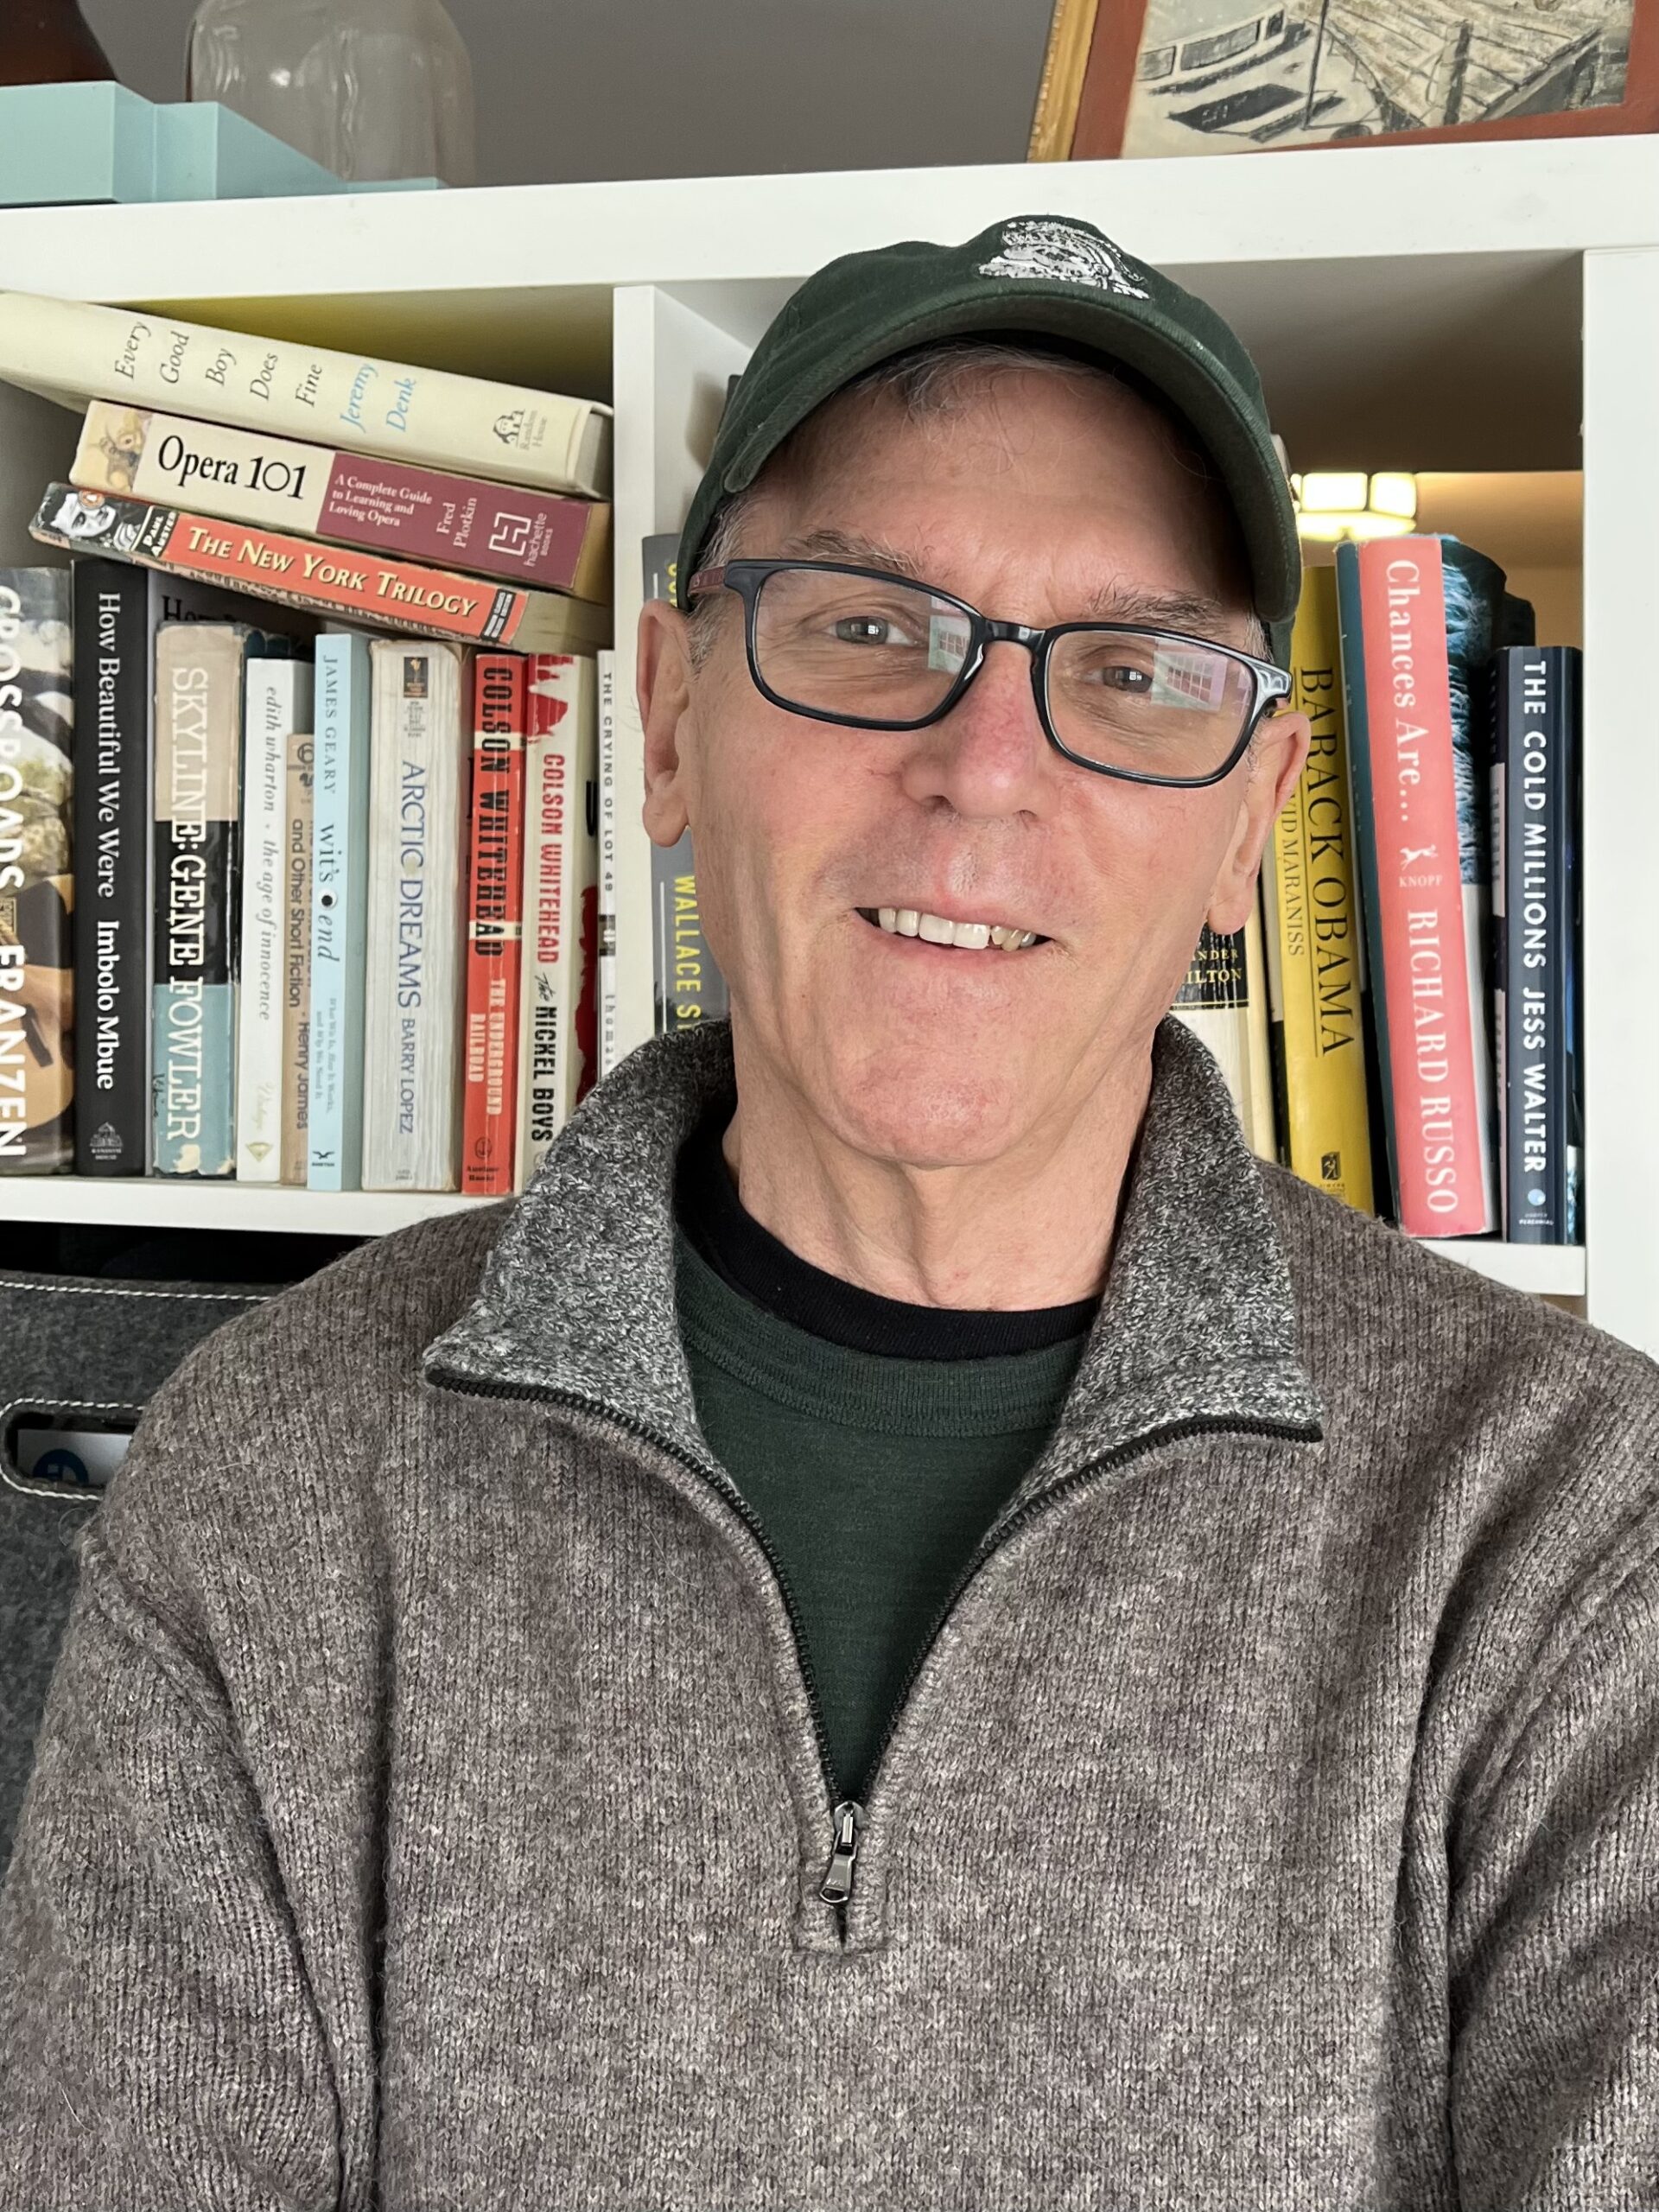 Volunteer Steve Giegerich is wearing square black glasses, a black baseball cap, and a grey sweater. He is standing in front of a book case and smiling.